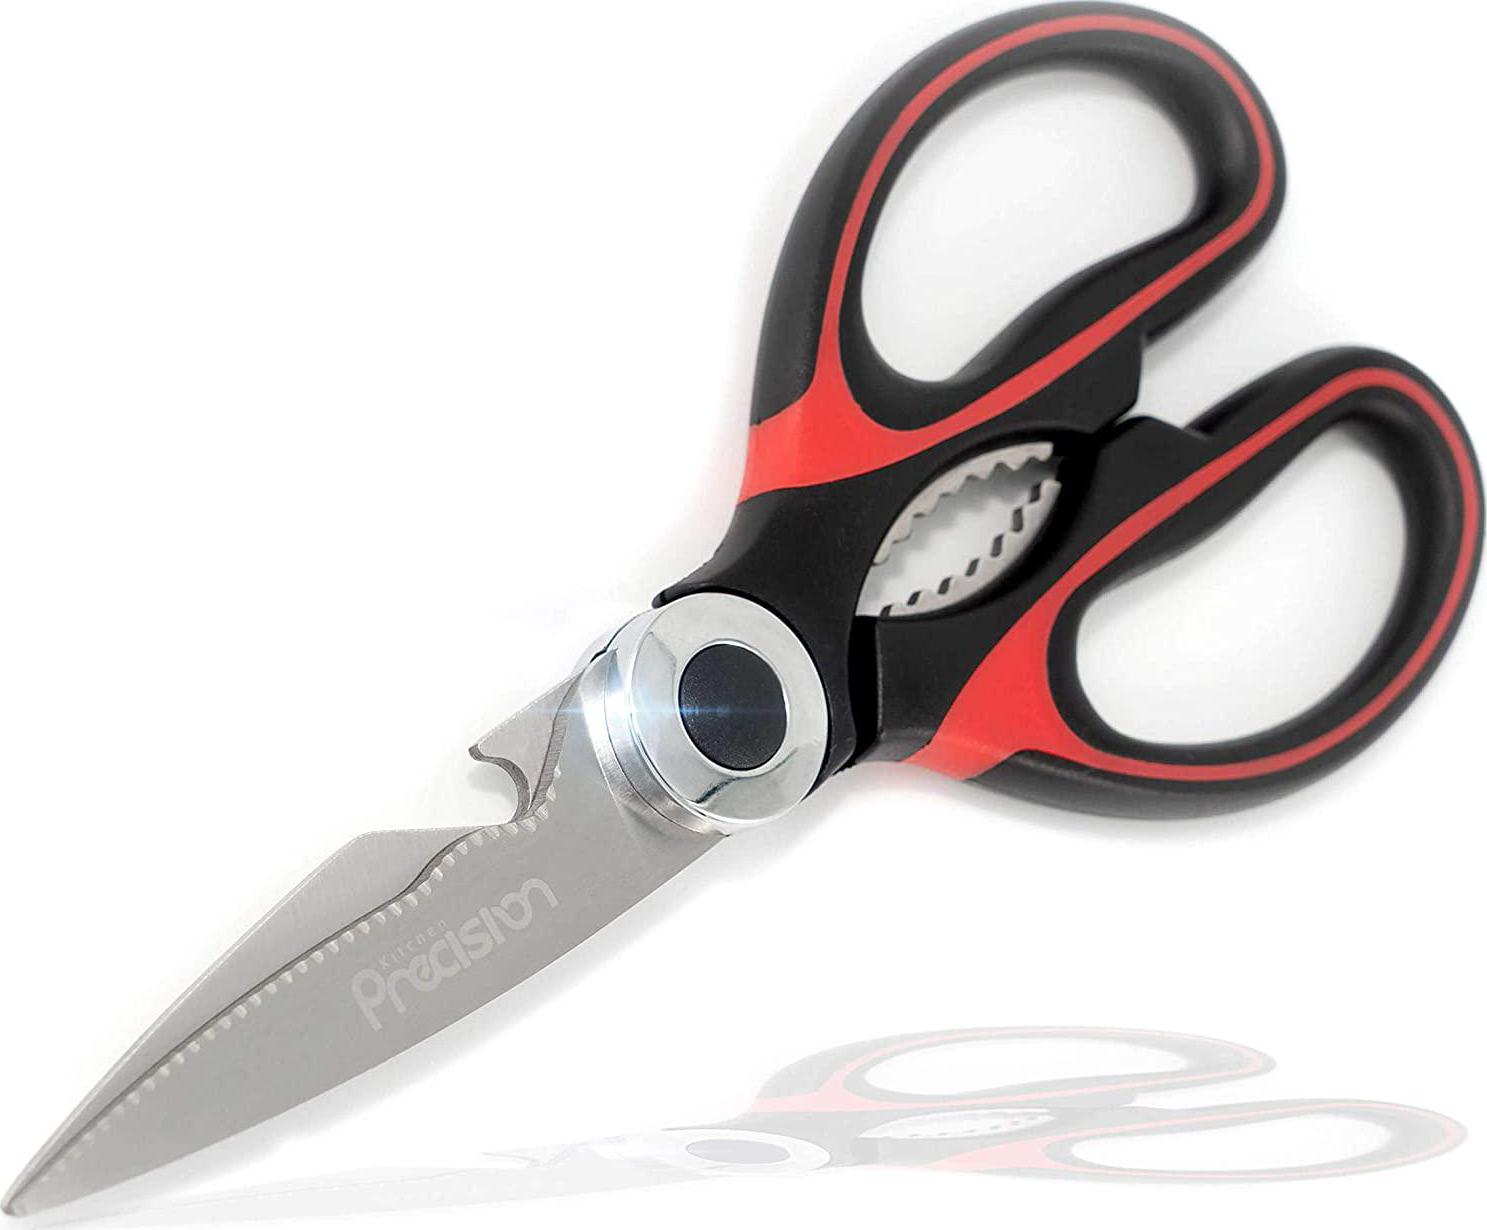 Kitchen Precision, Kitchen Precision Scissors [2022] - Ultra-Sharp Stainless Steel Heavy Duty Shears - Serrated Scaler, Bottle Opener - Dishwasher Safe - Kitchen - Kitchen Tools and Gadgets - Cookware (Black / Red)